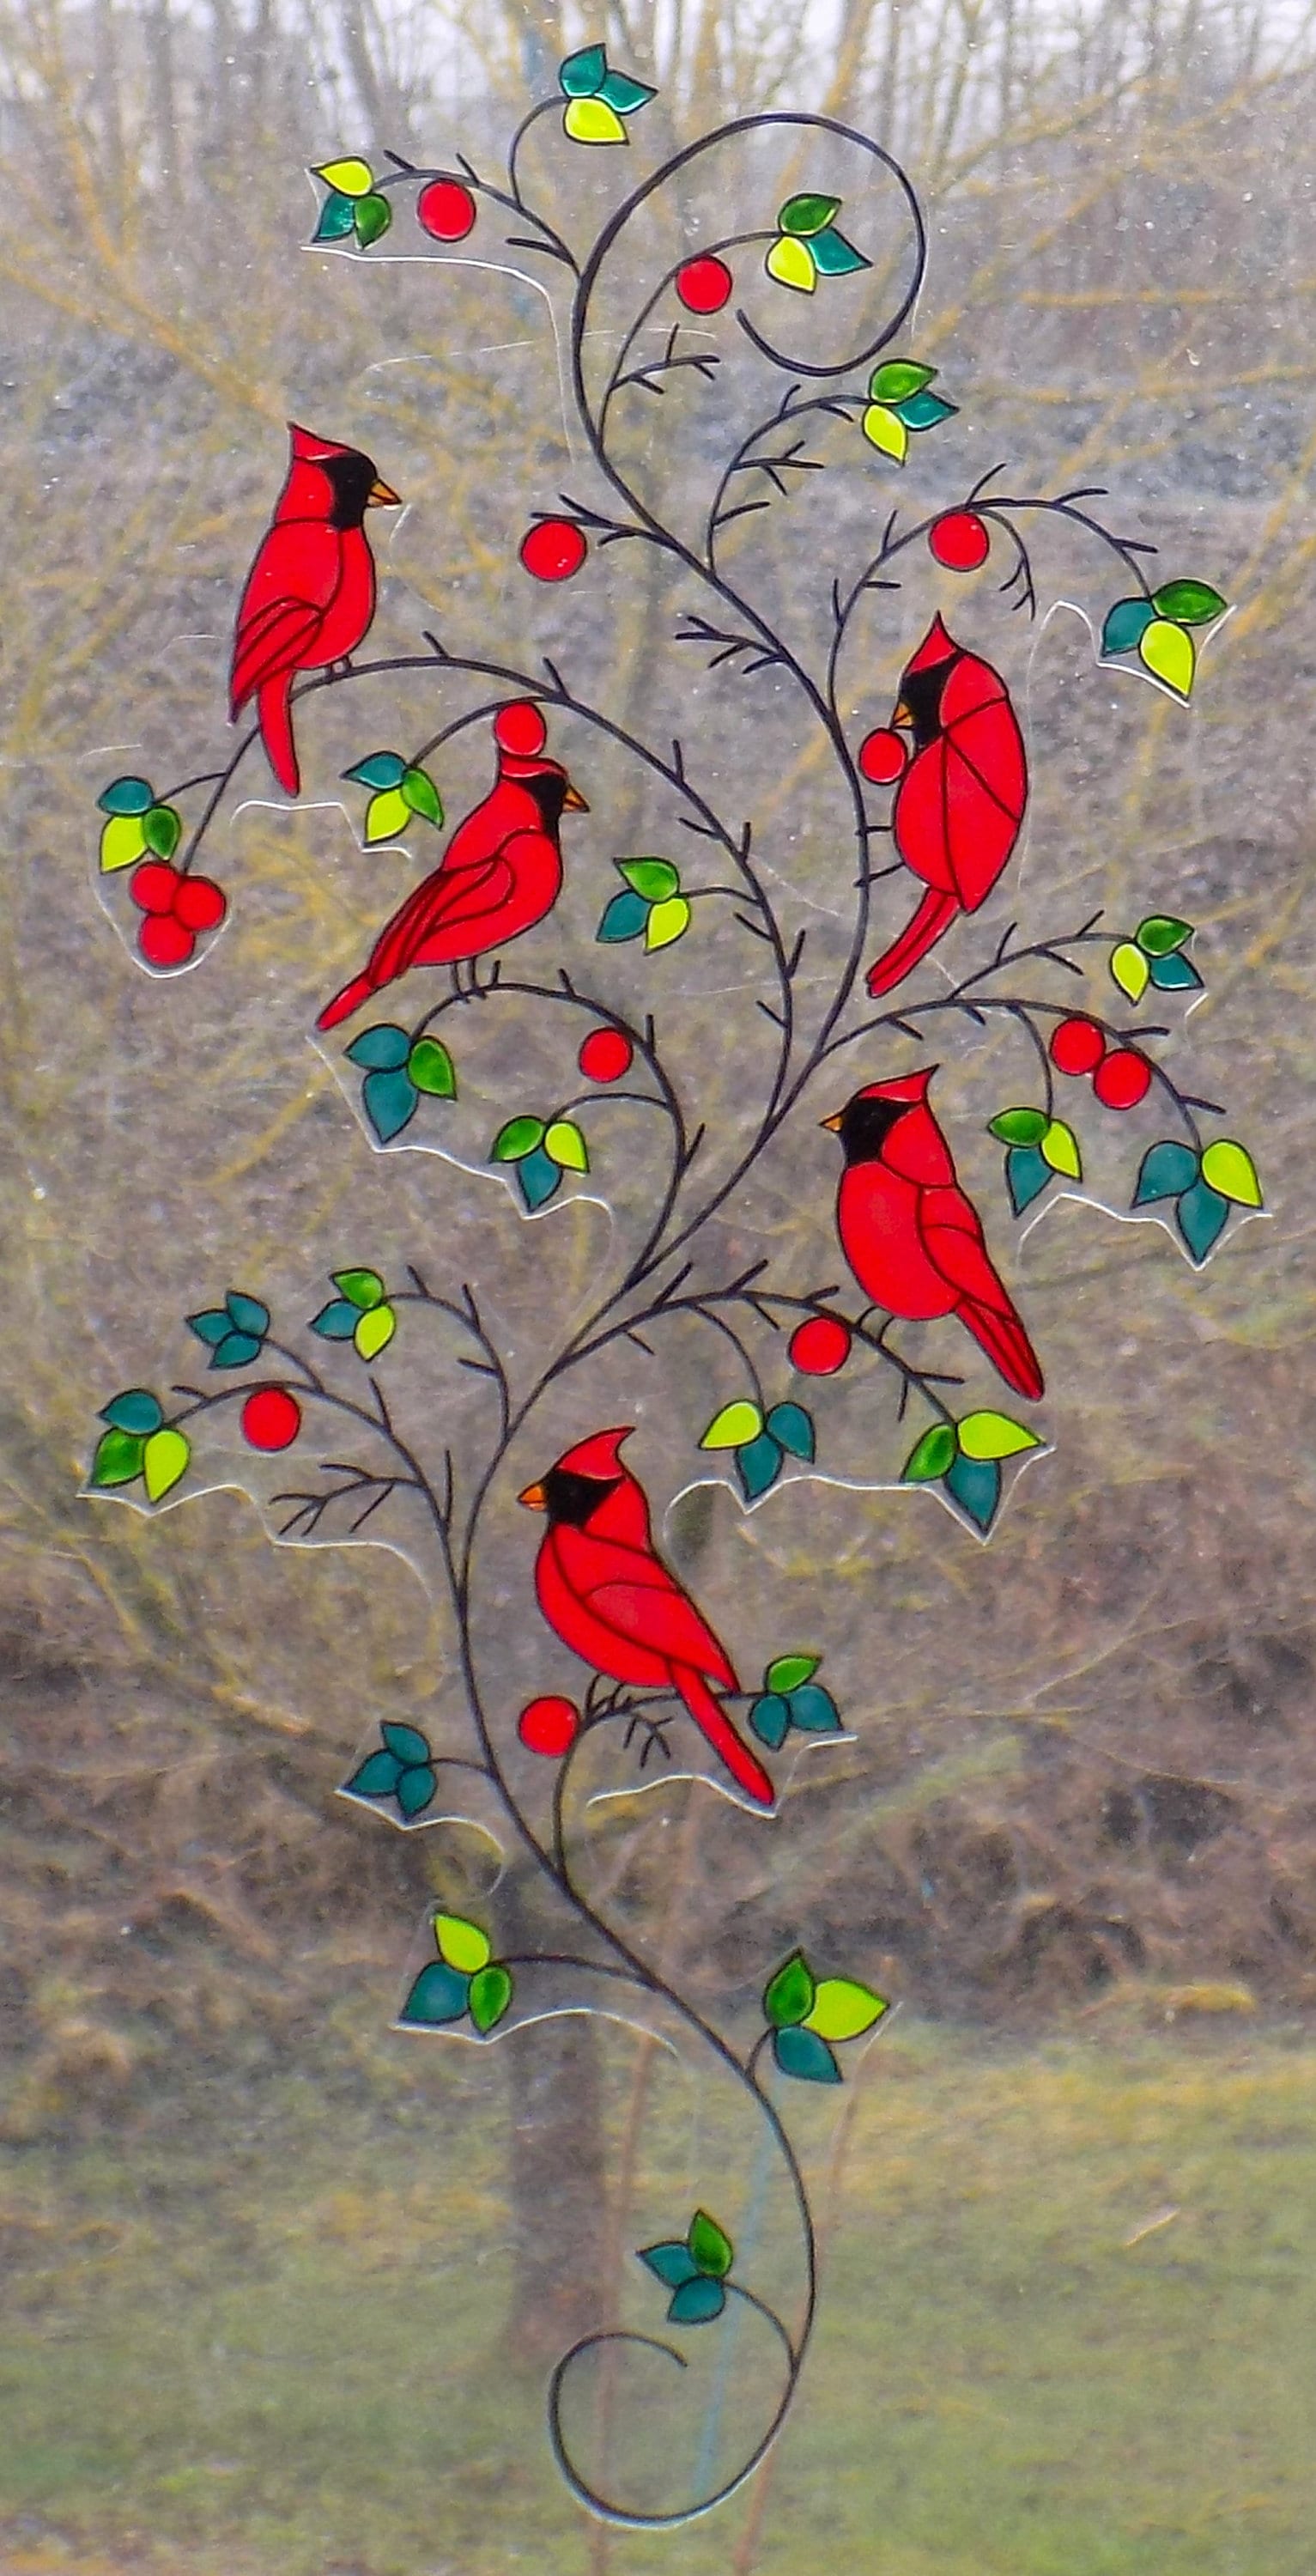 Wicoart Sticker Window Color Cling Vitrail Stained Glass Decal Arbre Aux Oiseaux